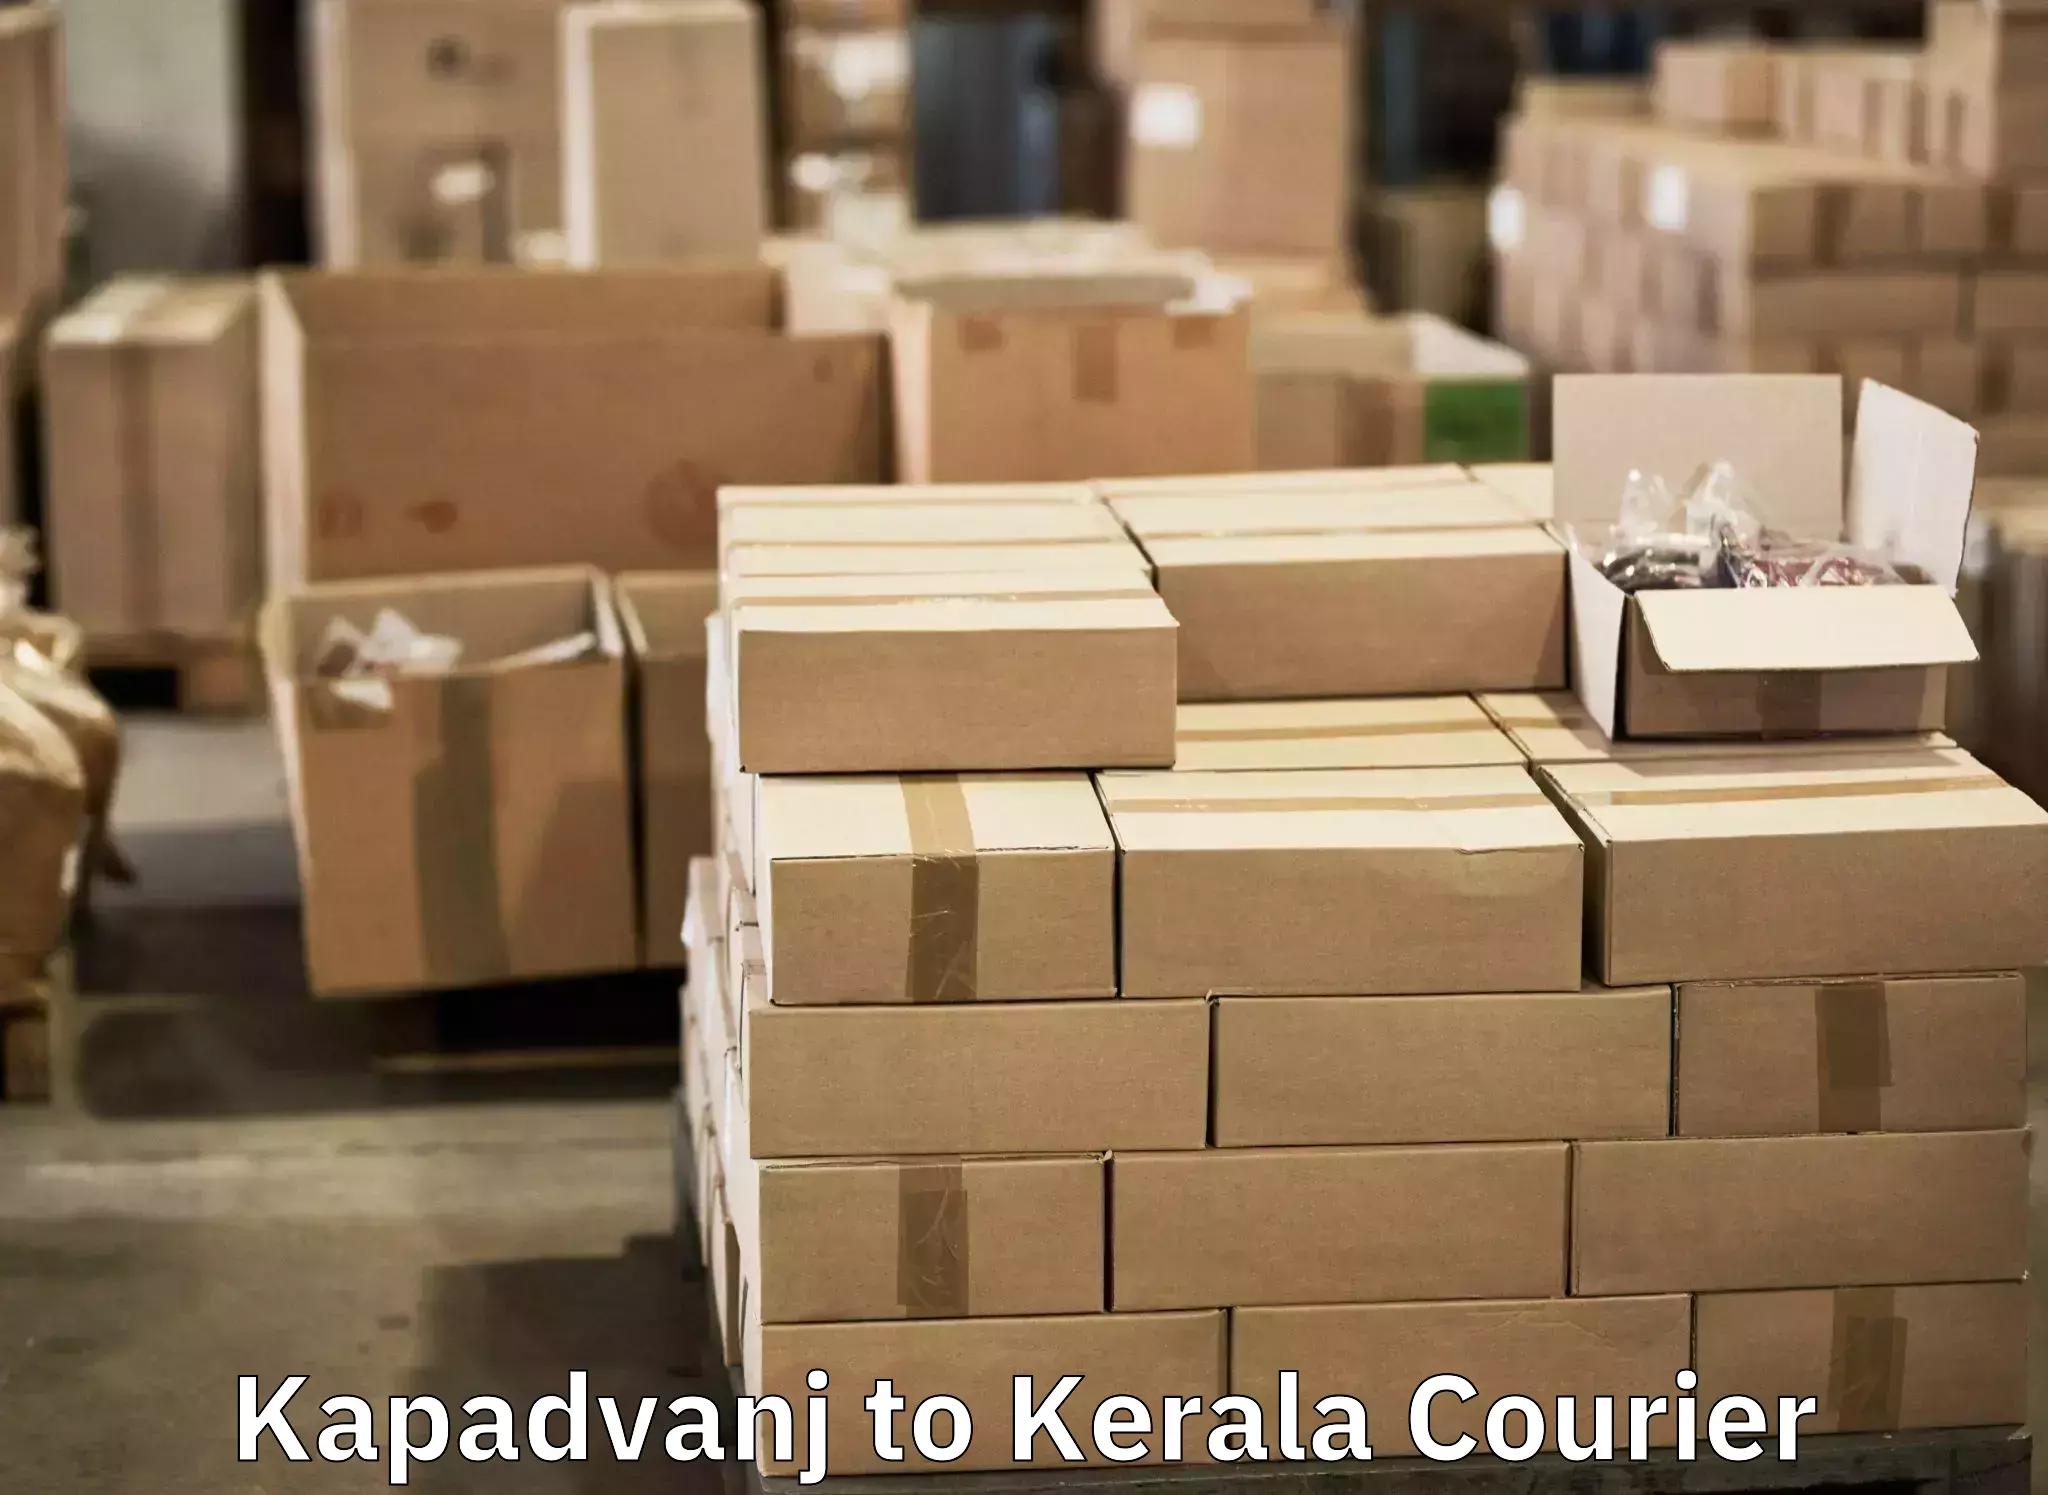 Doorstep luggage collection Kapadvanj to Cochin University of Science and Technology